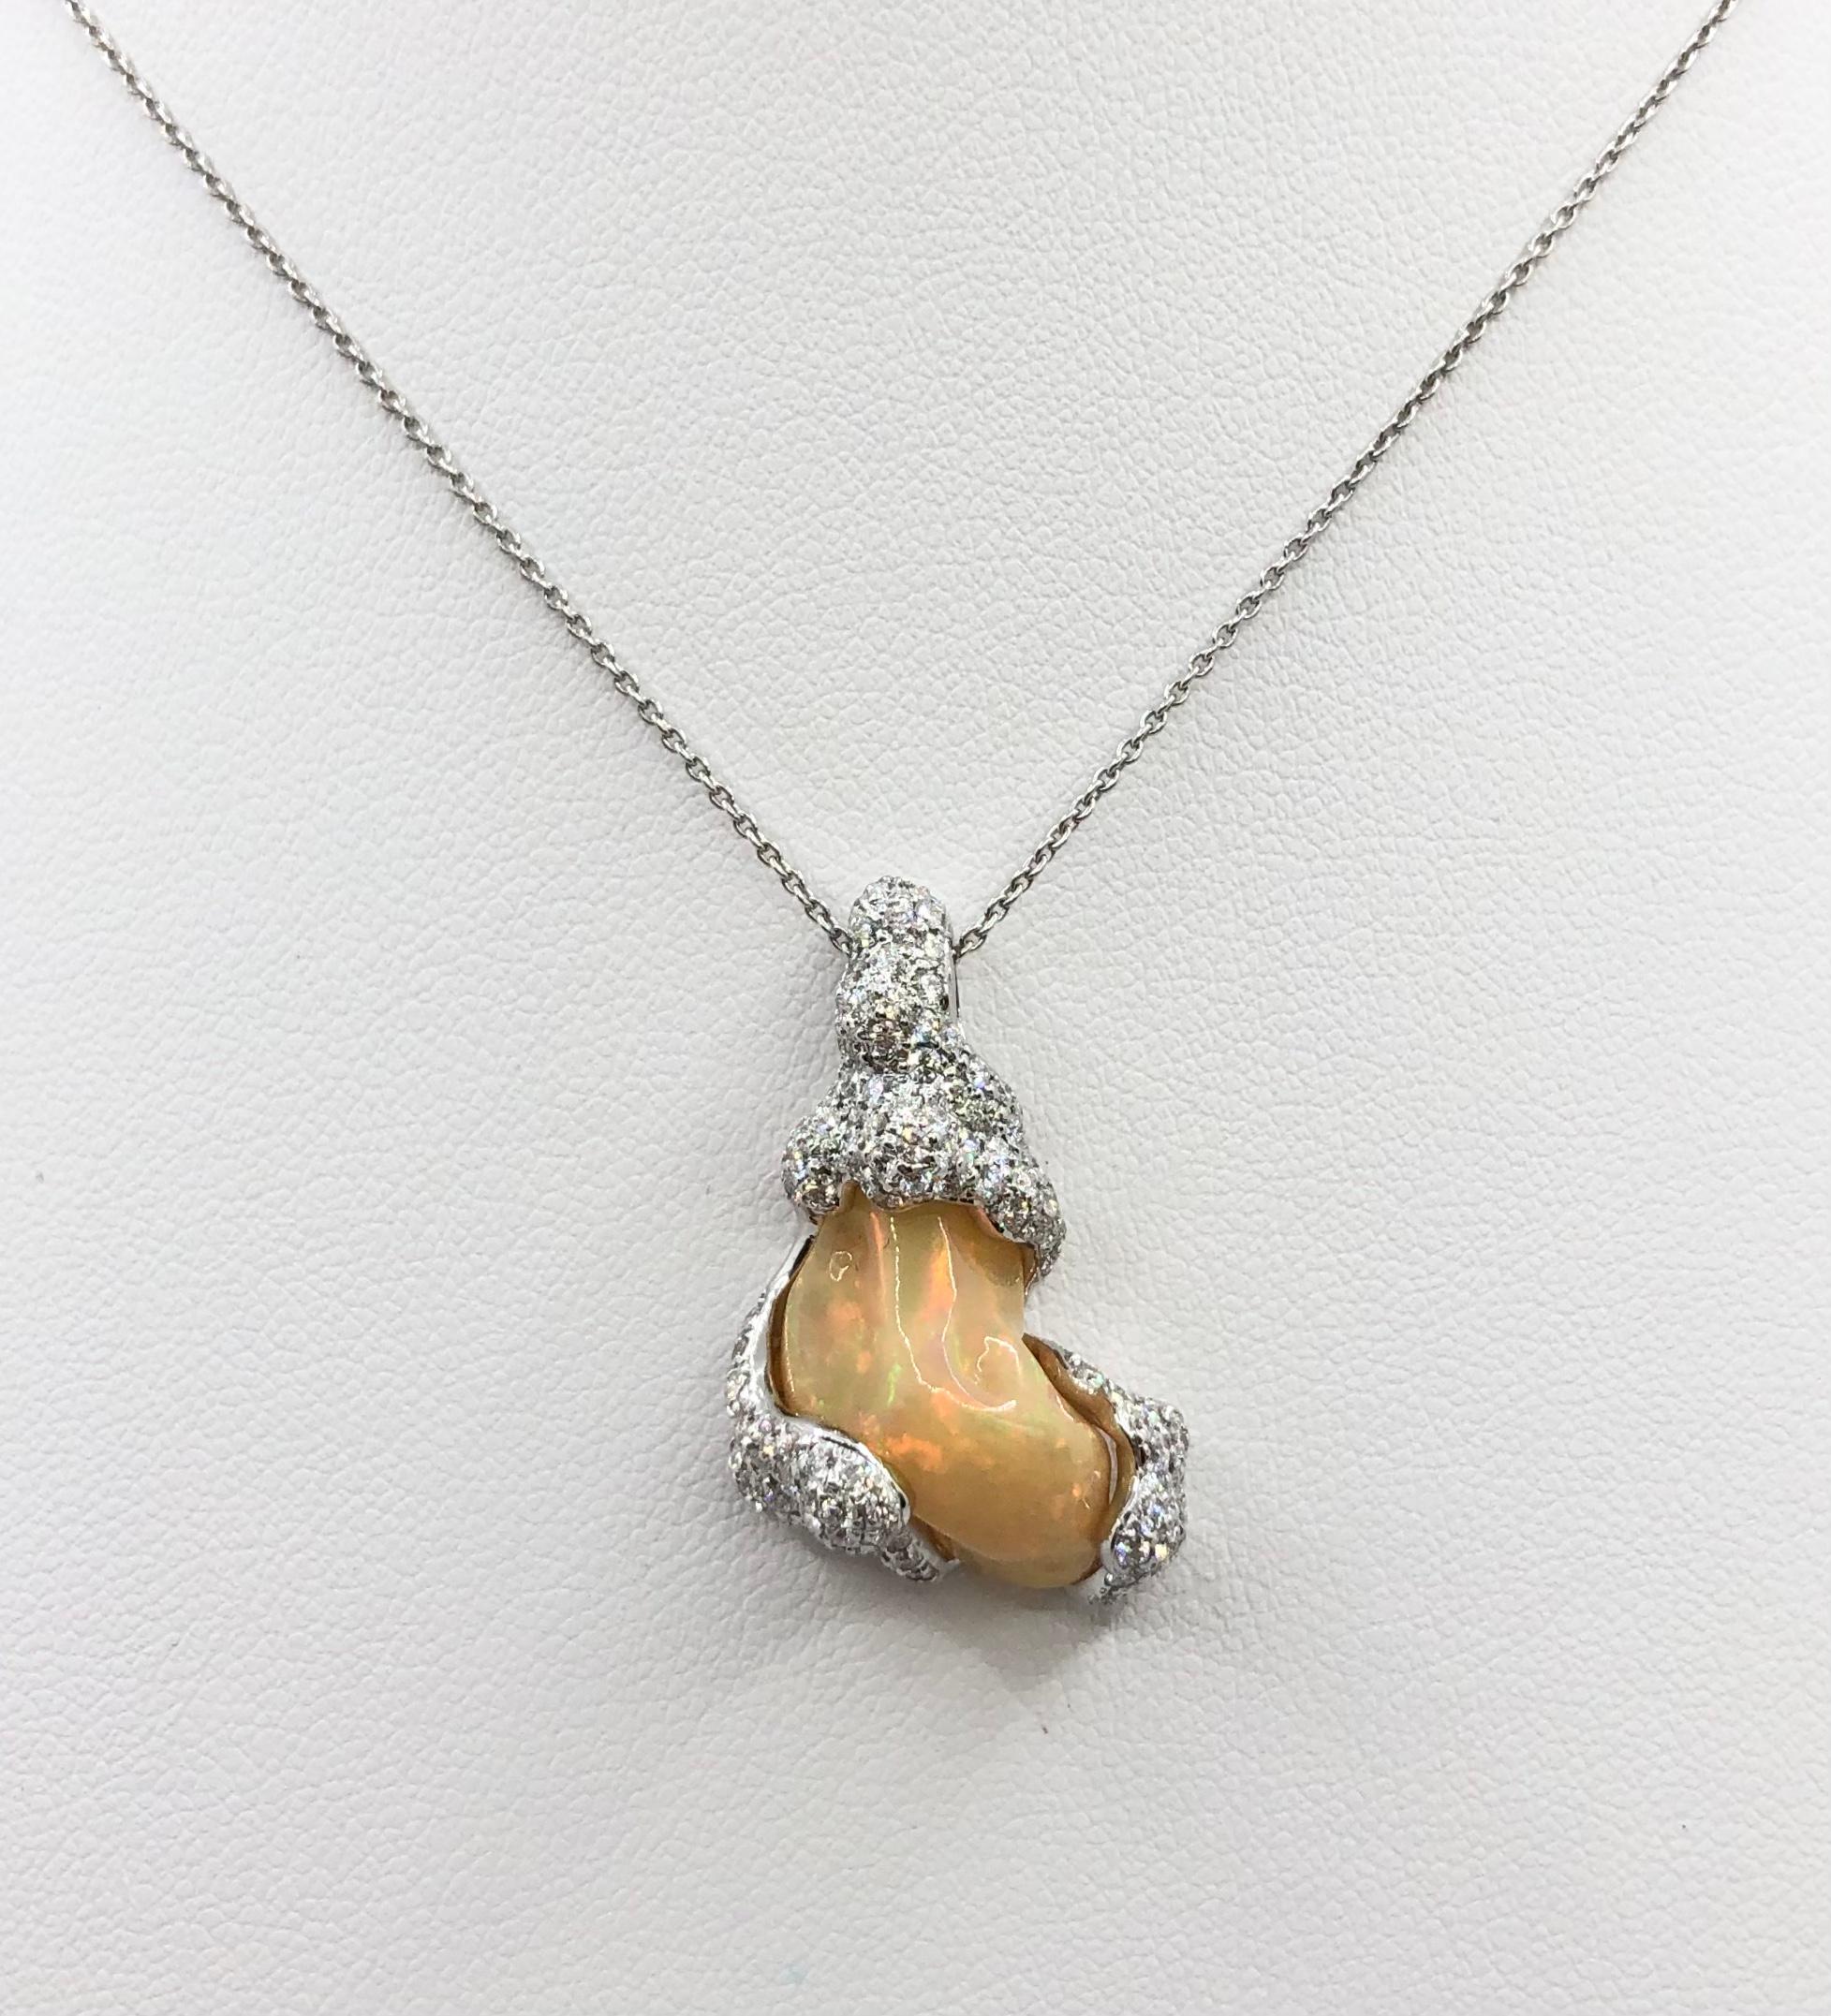 Opal 6.79 carats with Diamond 1.24 carats Pendant set in 18 Karat White Gold Settings
(chain not included)

Width: 1.9 cm 
Length: 3.0 cm
Total Weight: 7.0 grams

